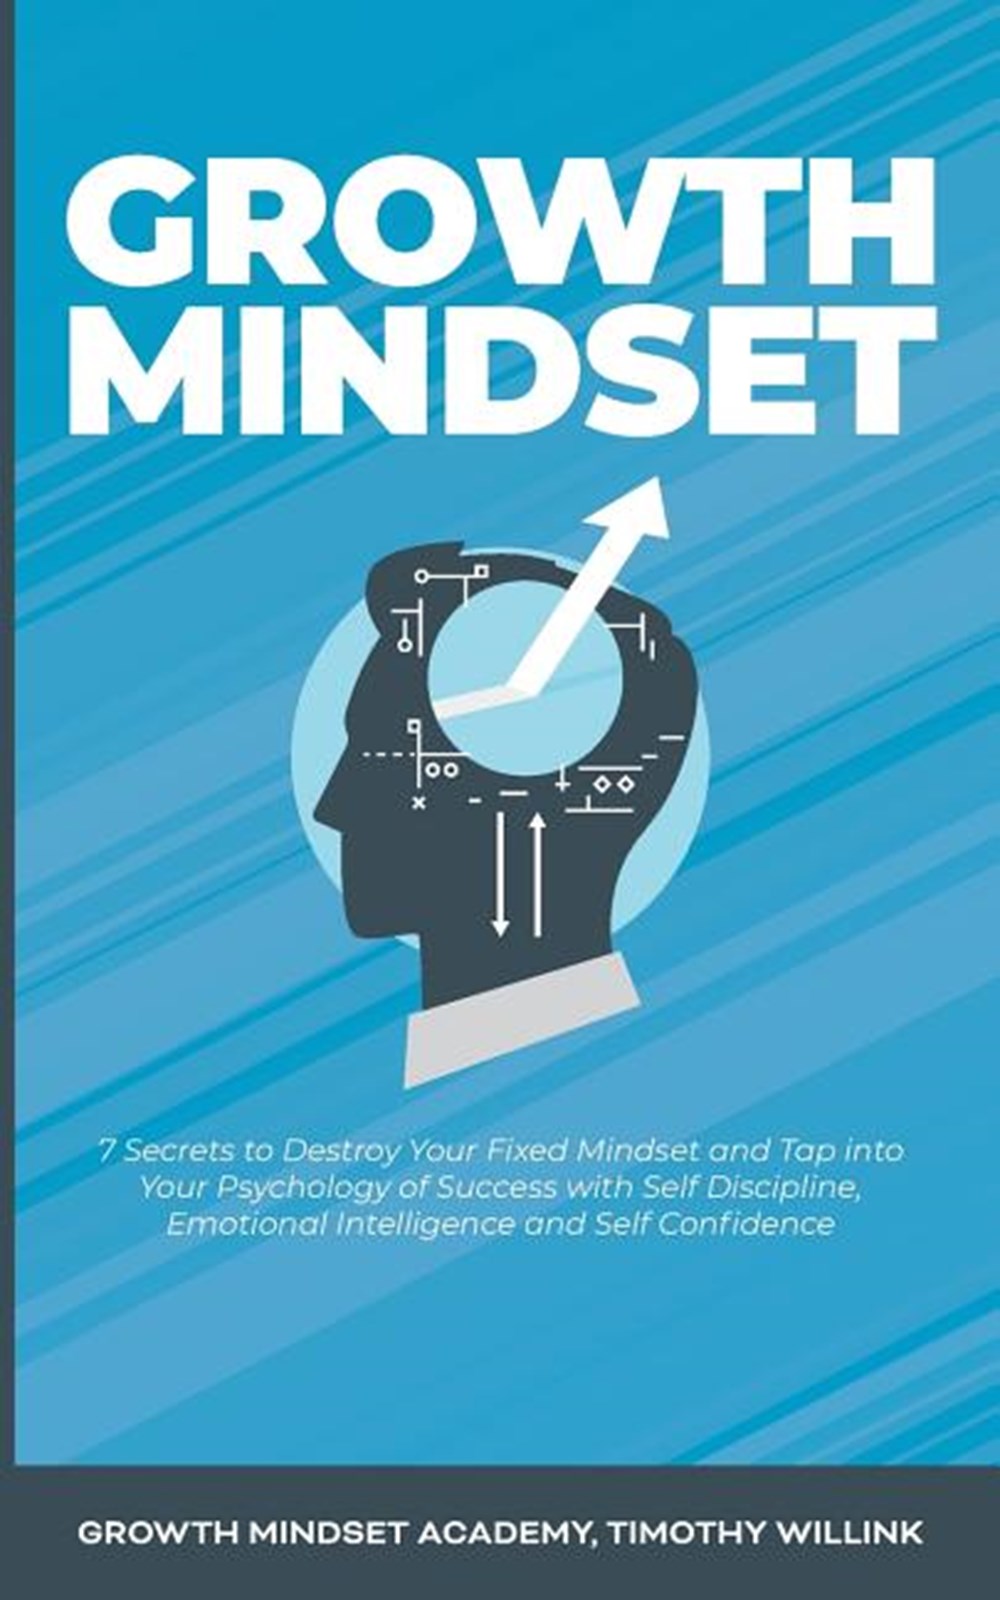 Growth Mindset: 7 Secrets to Destroy Your Fixed Mindset and Tap into Your Psychology of Success with